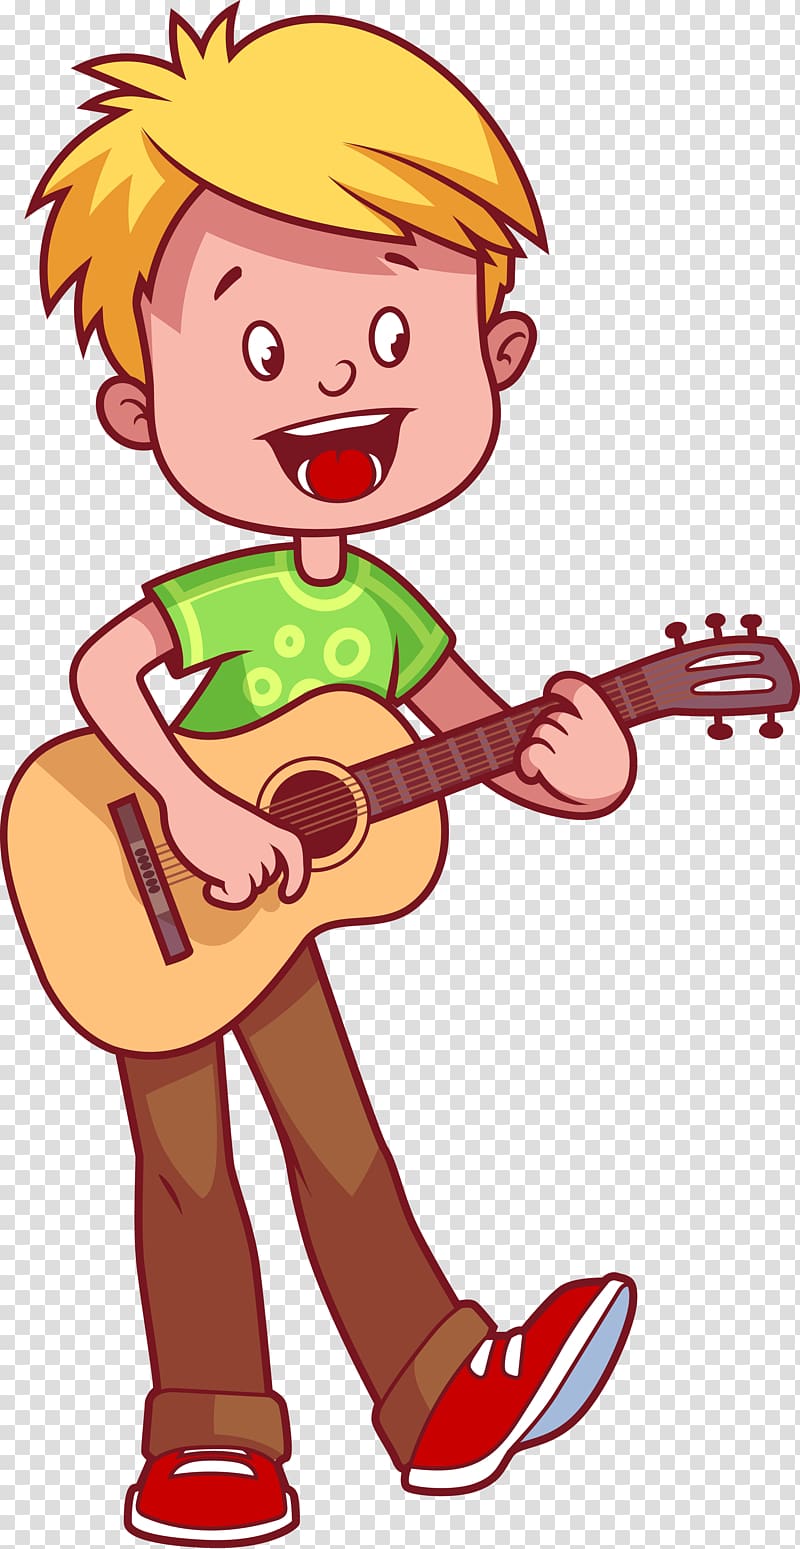 boy play acoustic guitar, Guitar Cartoon Illustration, Children playing guitar transparent background PNG clipart